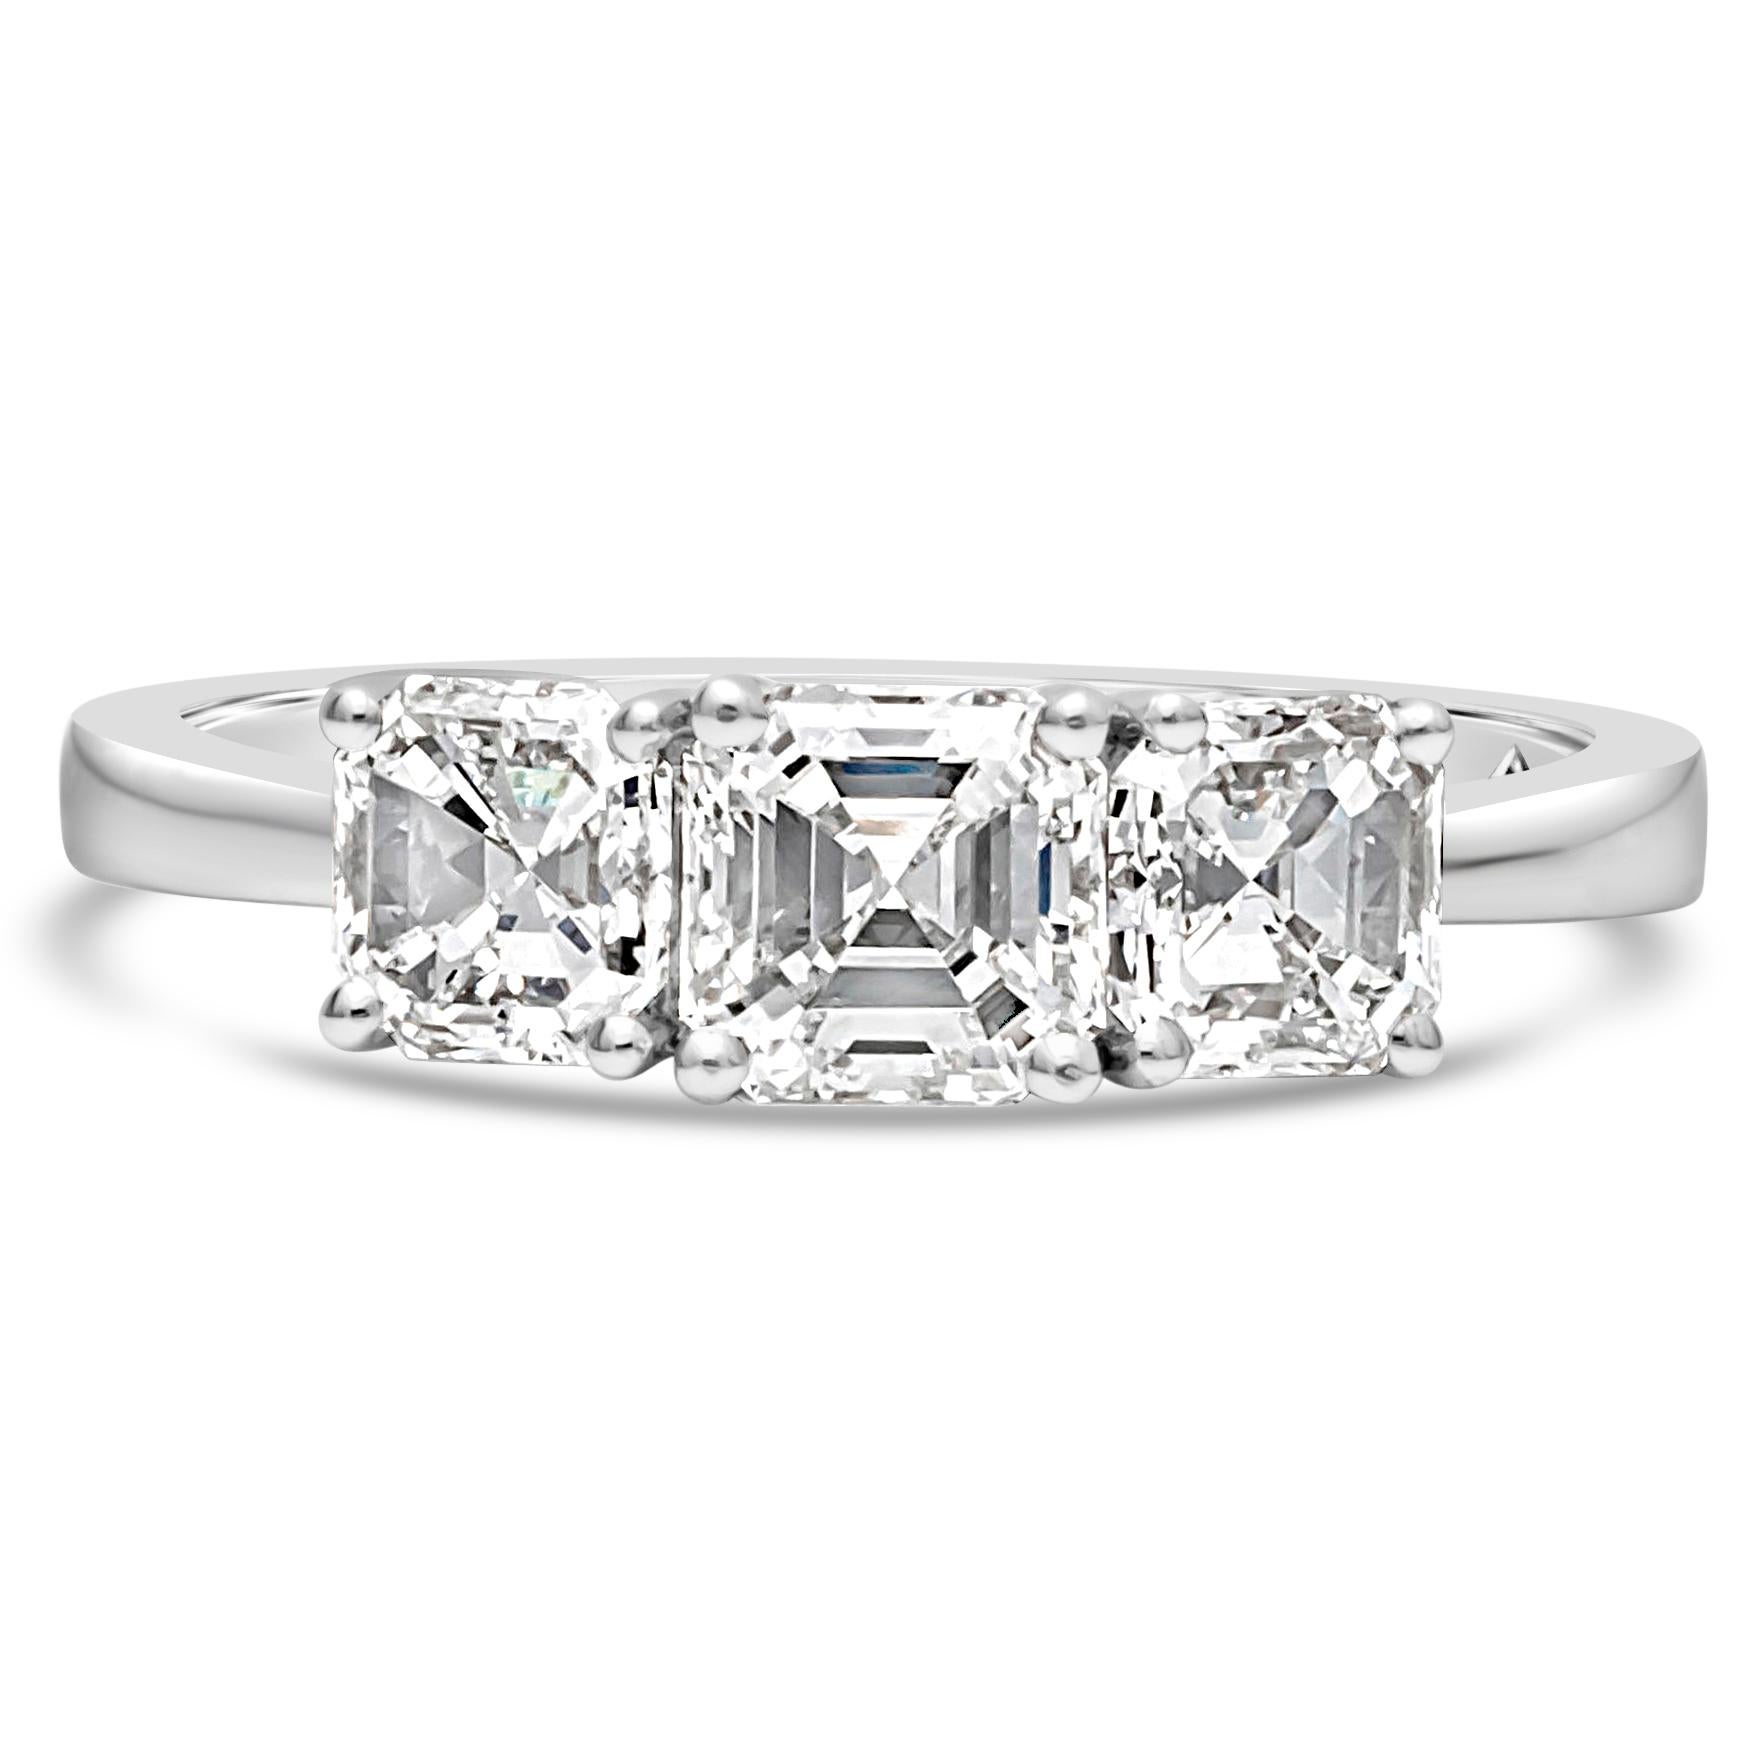 Finely crafted brilliant three-stone engagement ring set with three gorgeous asscher cut diamonds weighing 1.79 carats total. Set in a four prong 18K white gold basket and composition. Size 6.5 US and resizable upon request.

Roman Malakov is a